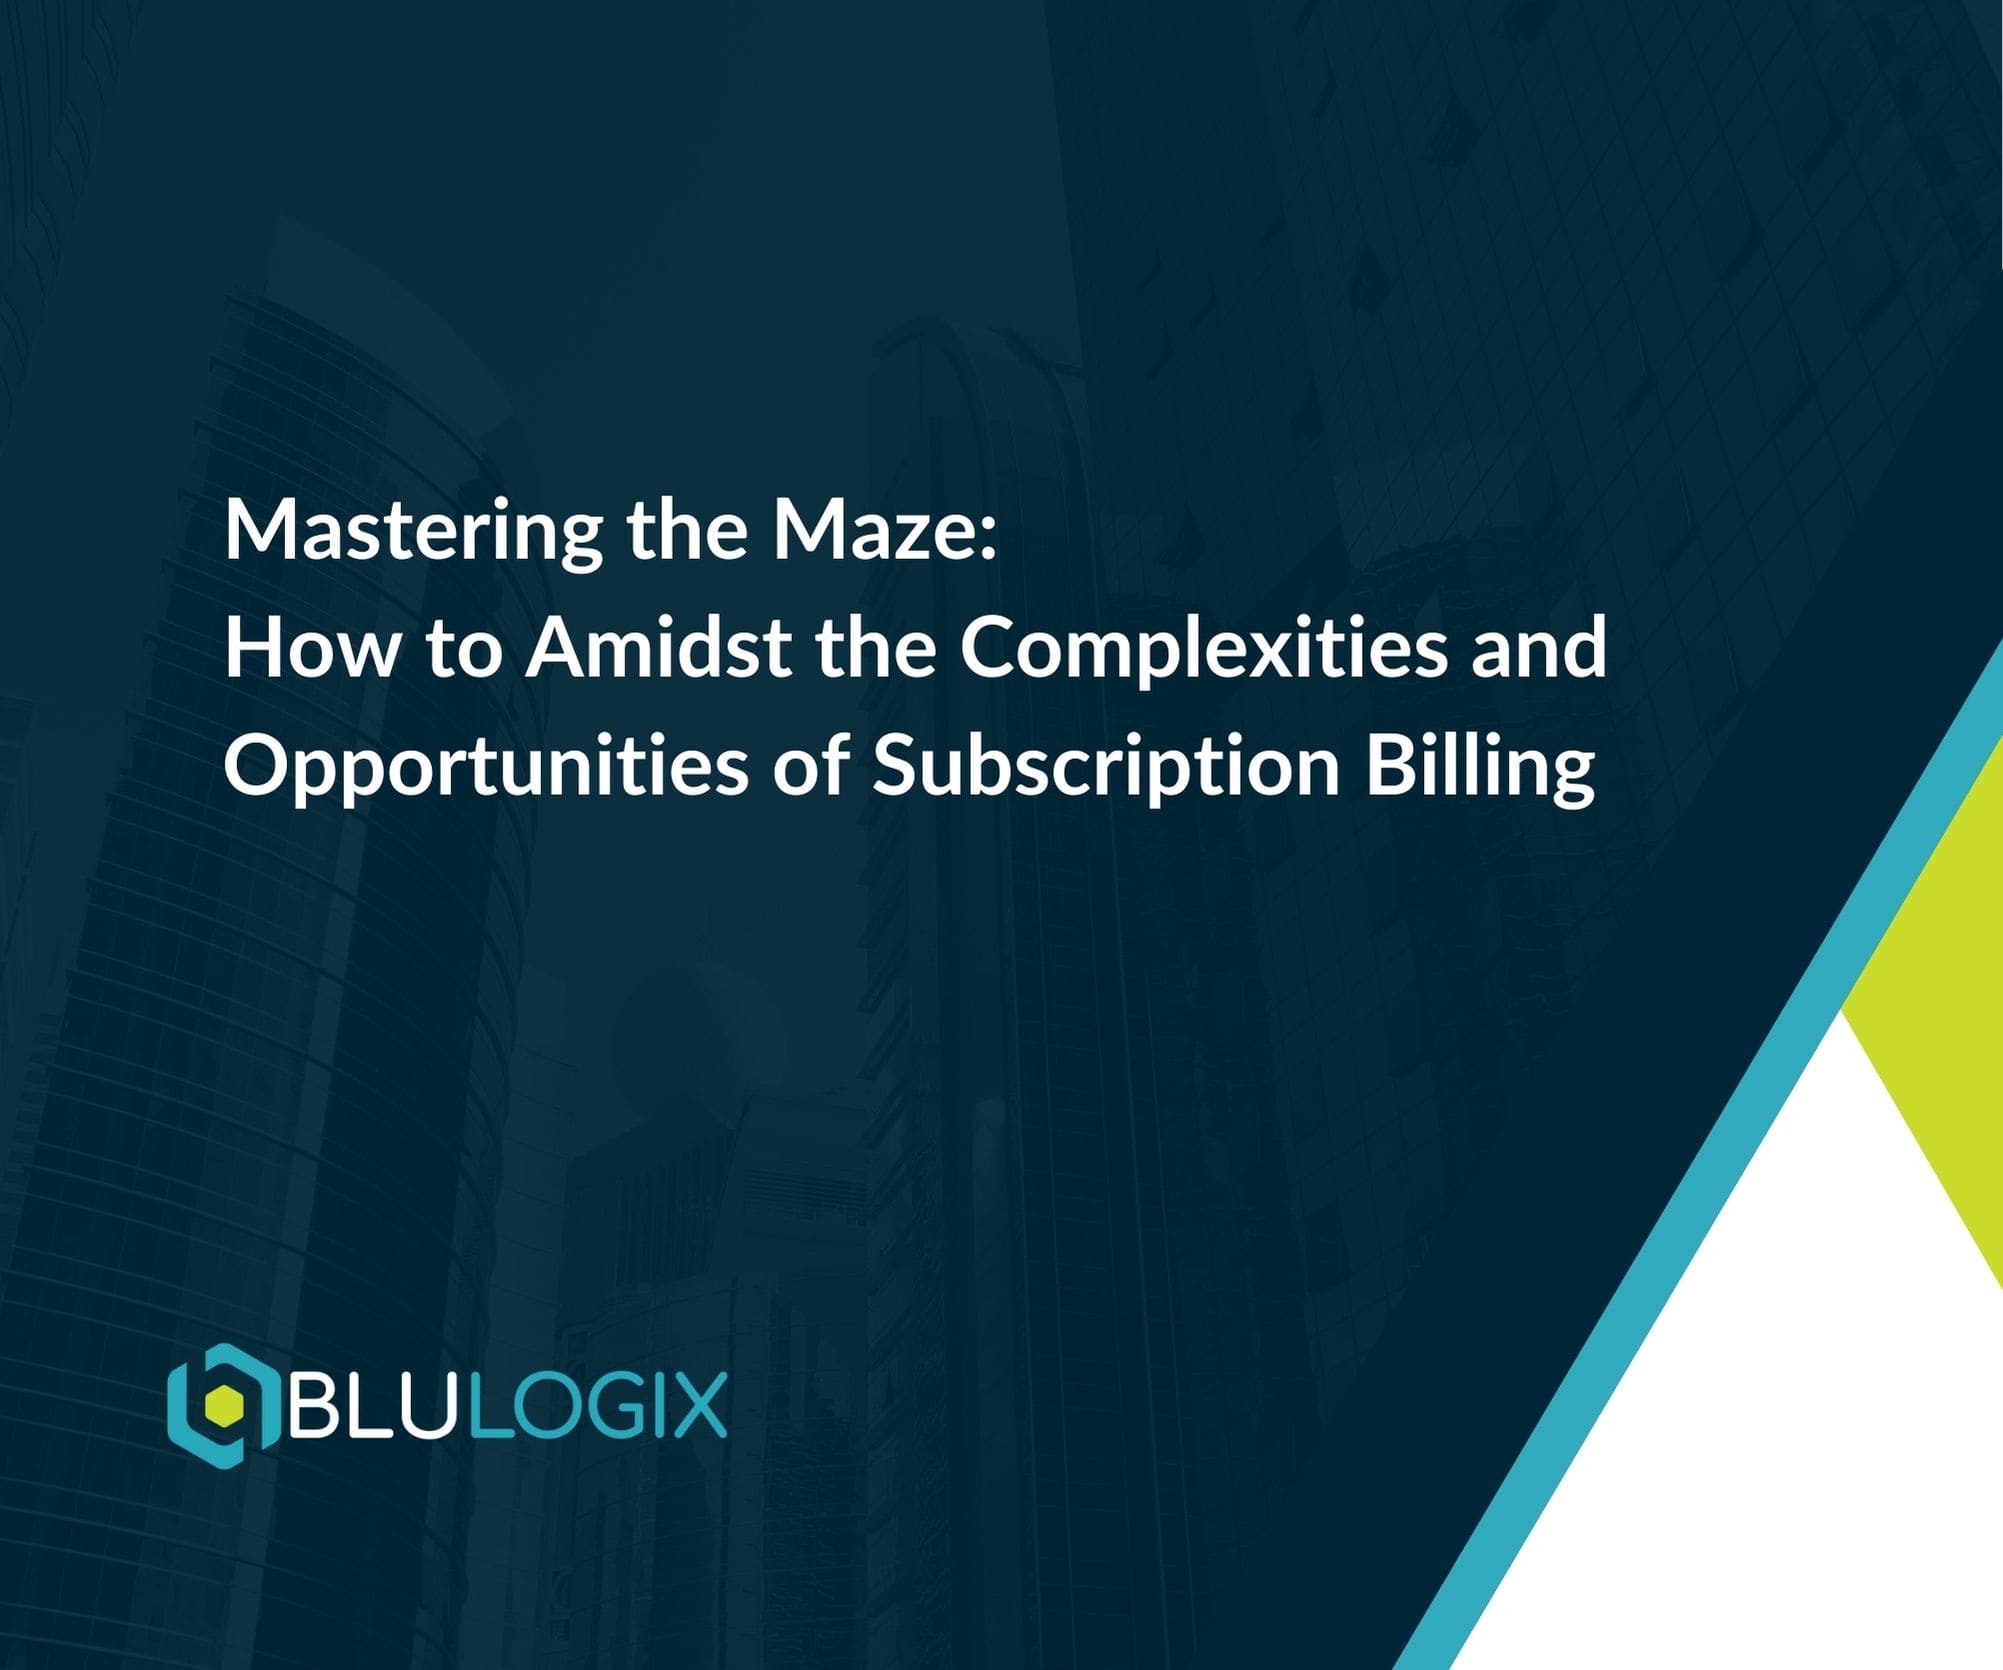 Mastering the Maze How to Amidst the Complexities and Opportunities of Subscription Billing